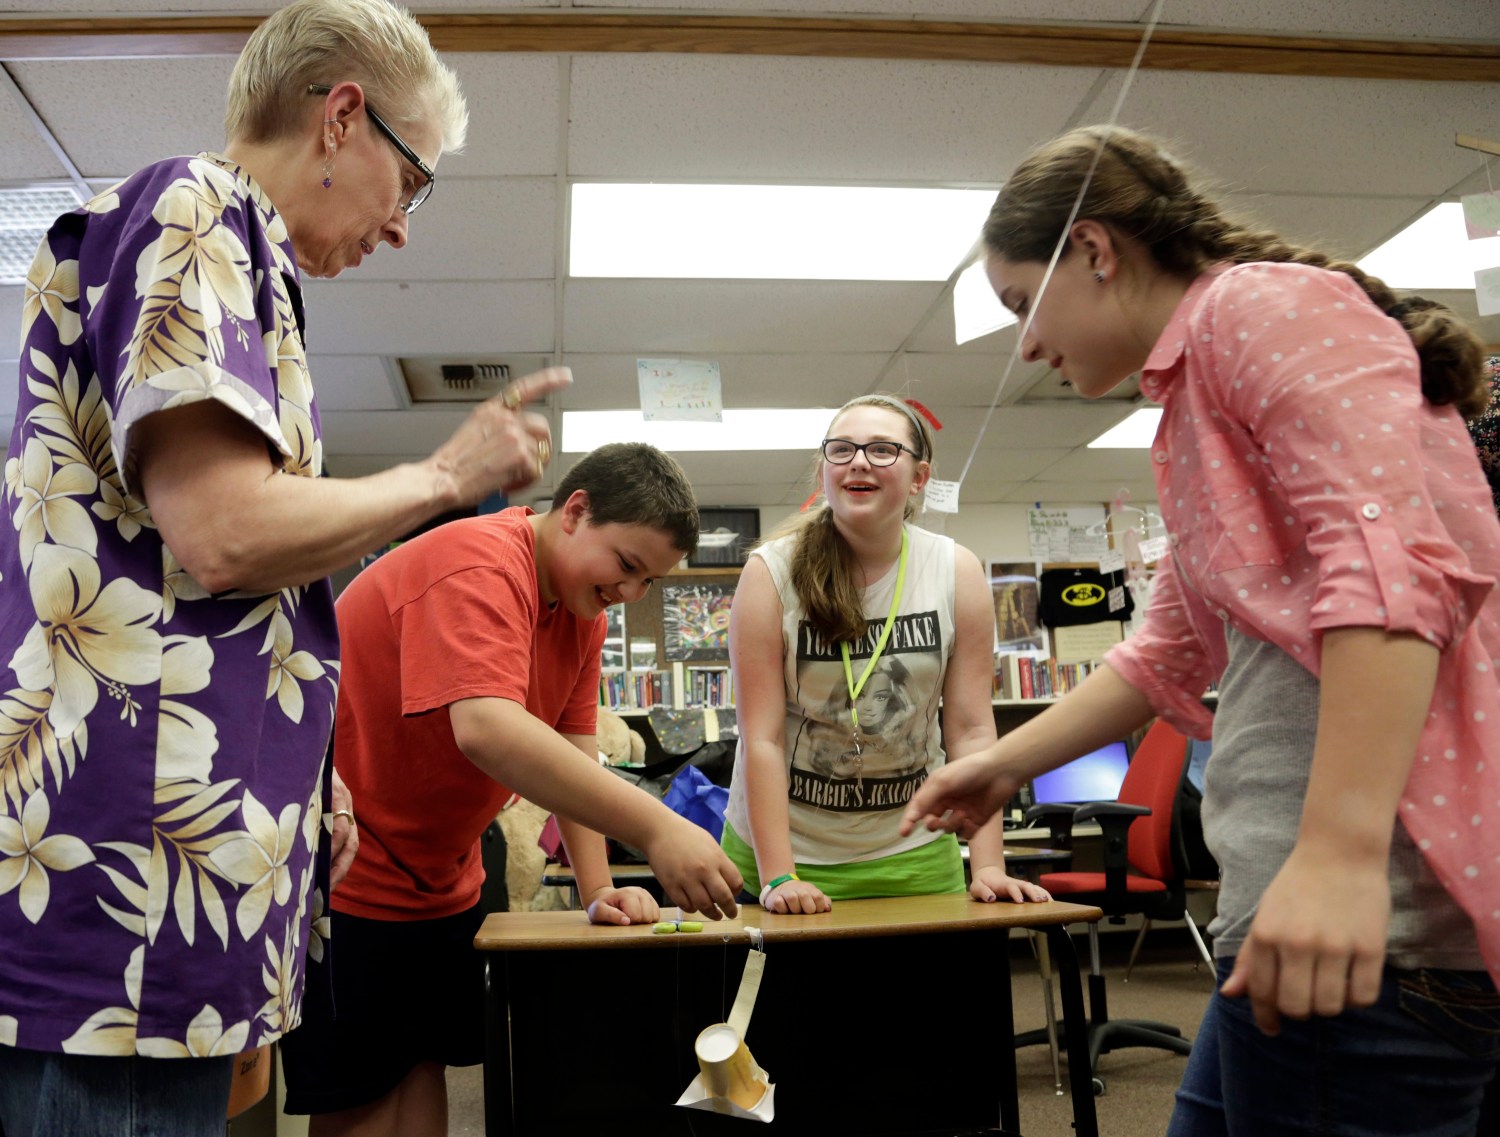 Teacher Heedum helps sixth-grade students Rosales, Weber and Heitman as they work with Boeing employees during after-school Science Technology Engineering and Math academy held at Crestwood Elementary School in Covington, Washington